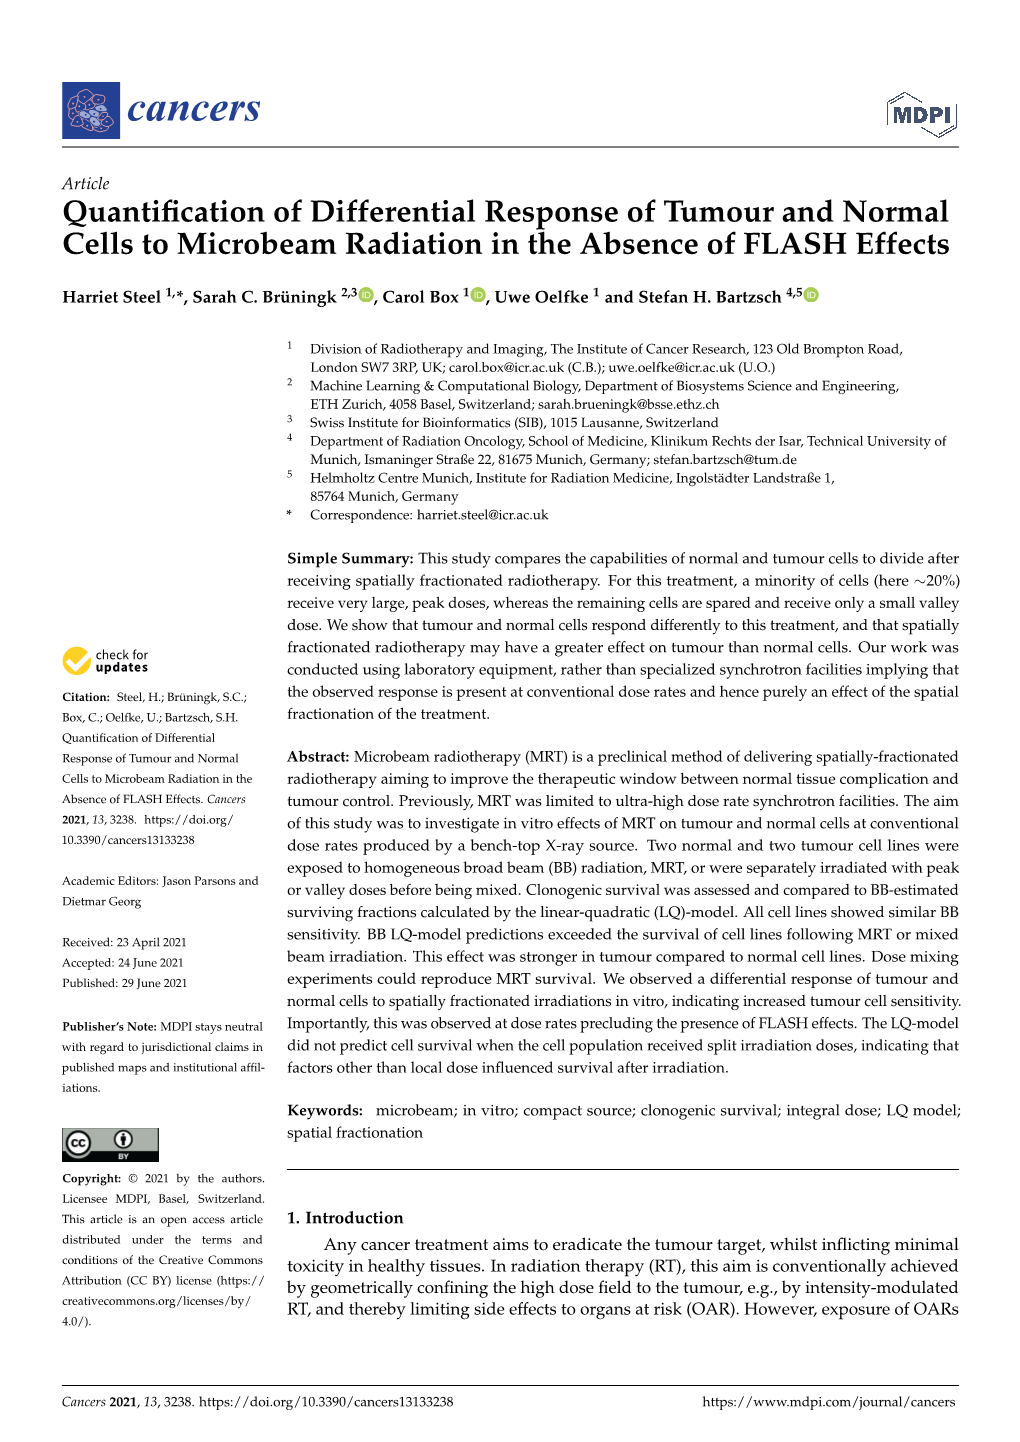 Quantification of Differential Response of Tumour and Normal Cells to Microbeam Radiation in the Absence of FLASH Effects